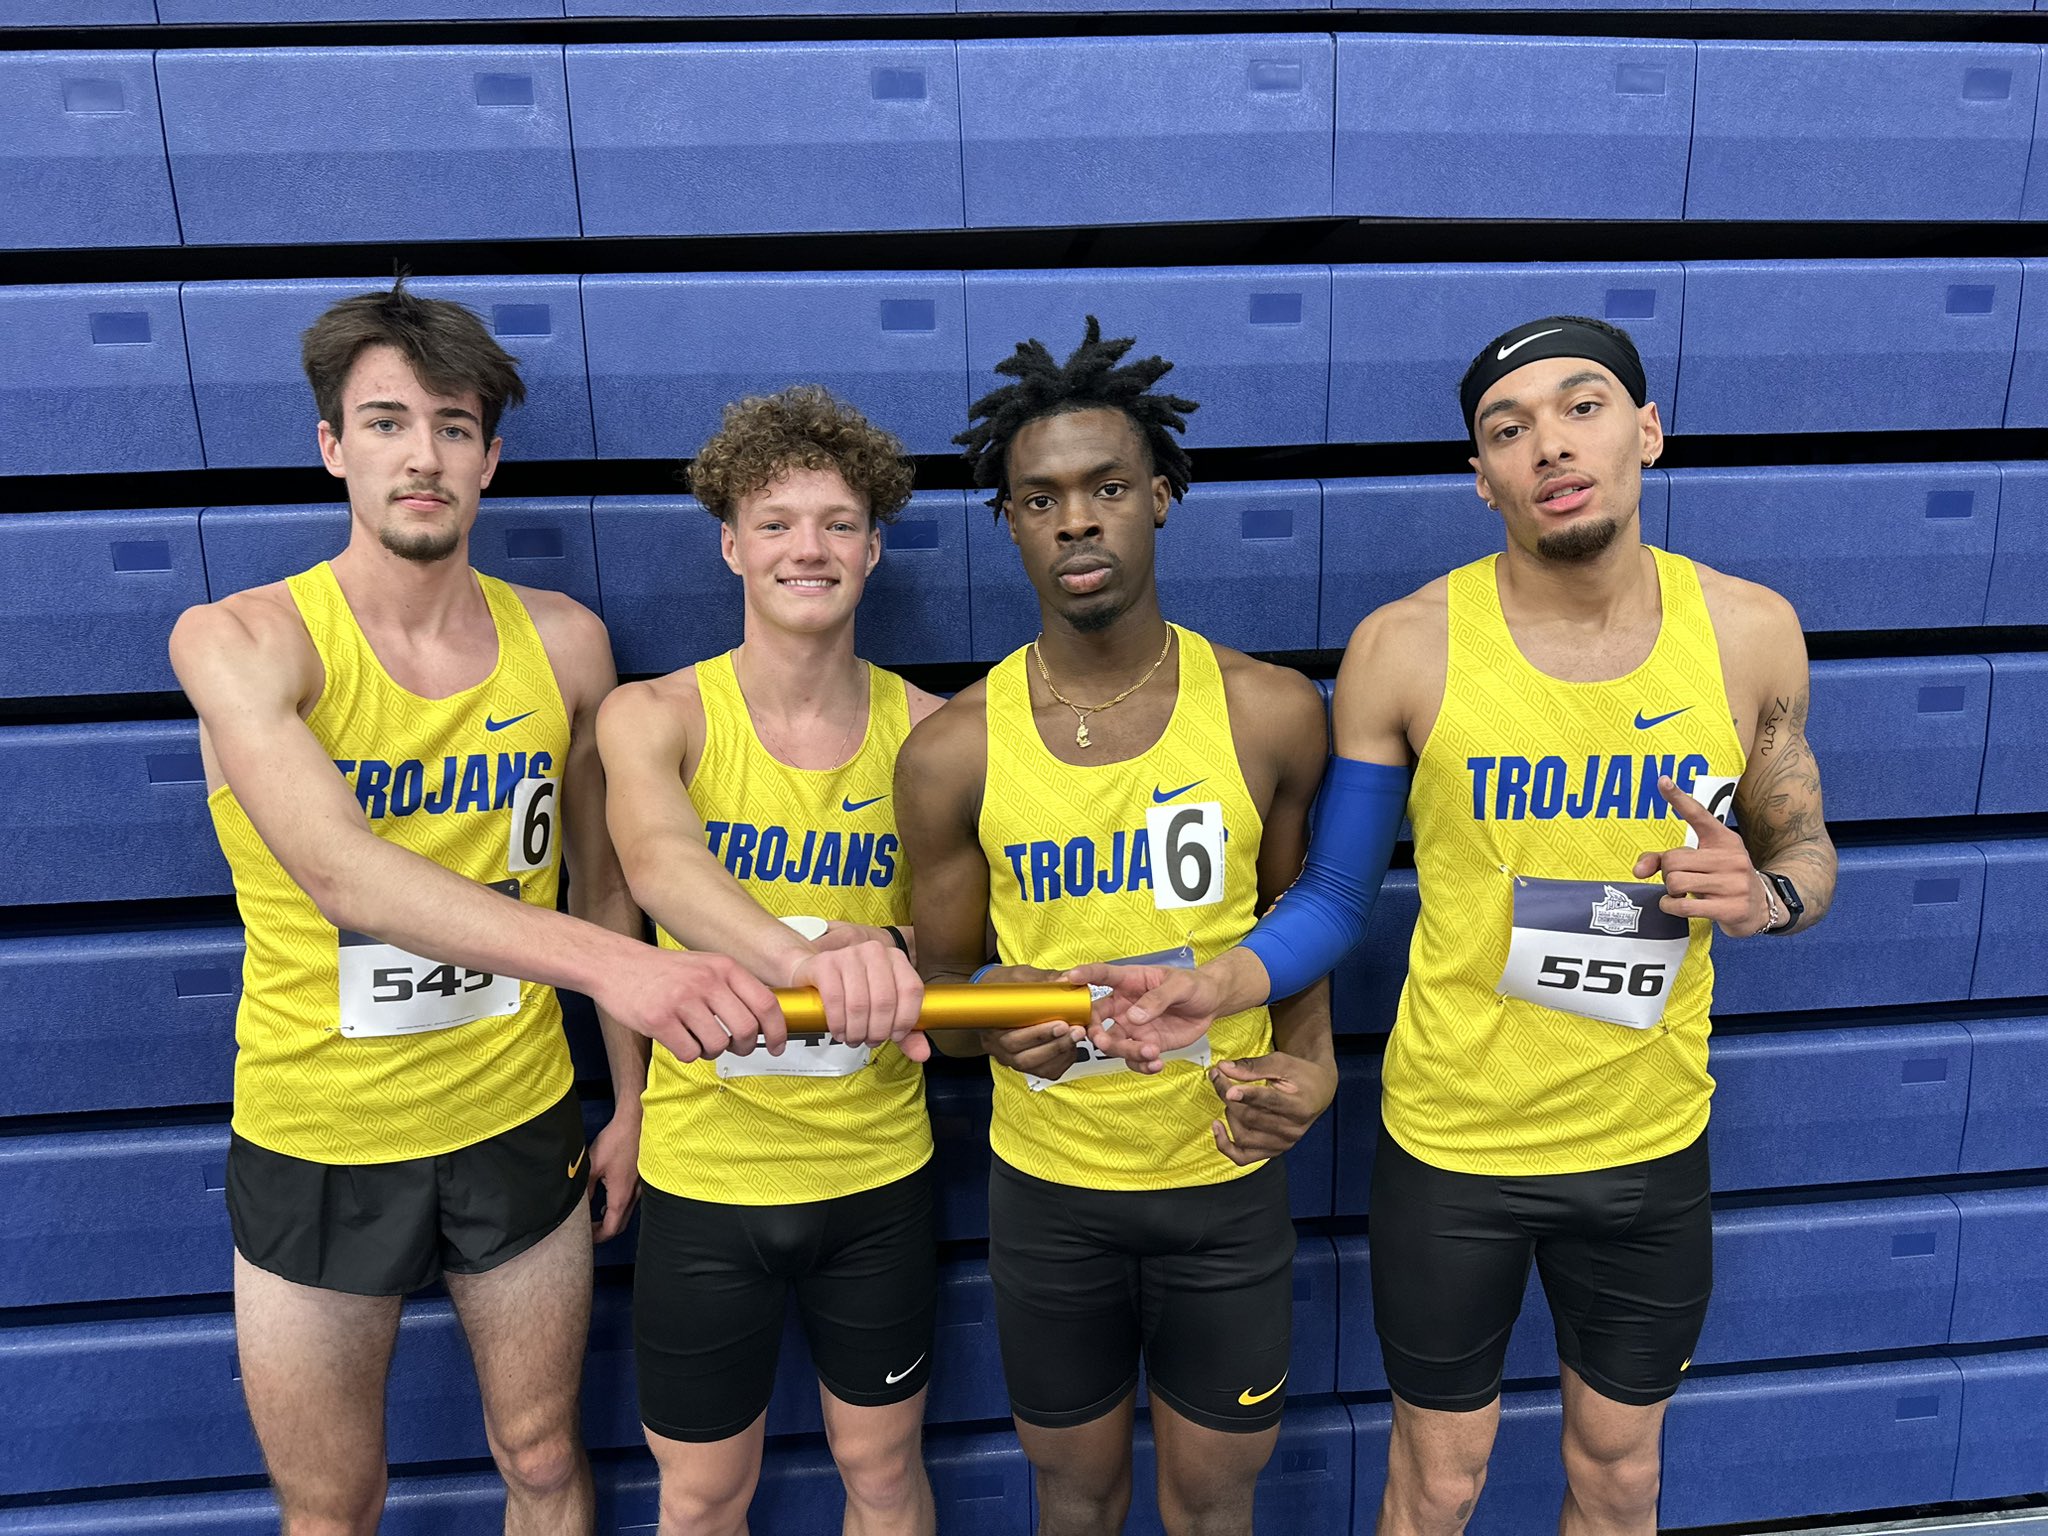 NIACC's Owen Almelien, Bryson Canton, Quinton Ellis and Hugo Massa set a school record in the distance medley relay Friday at the national indoor meet.